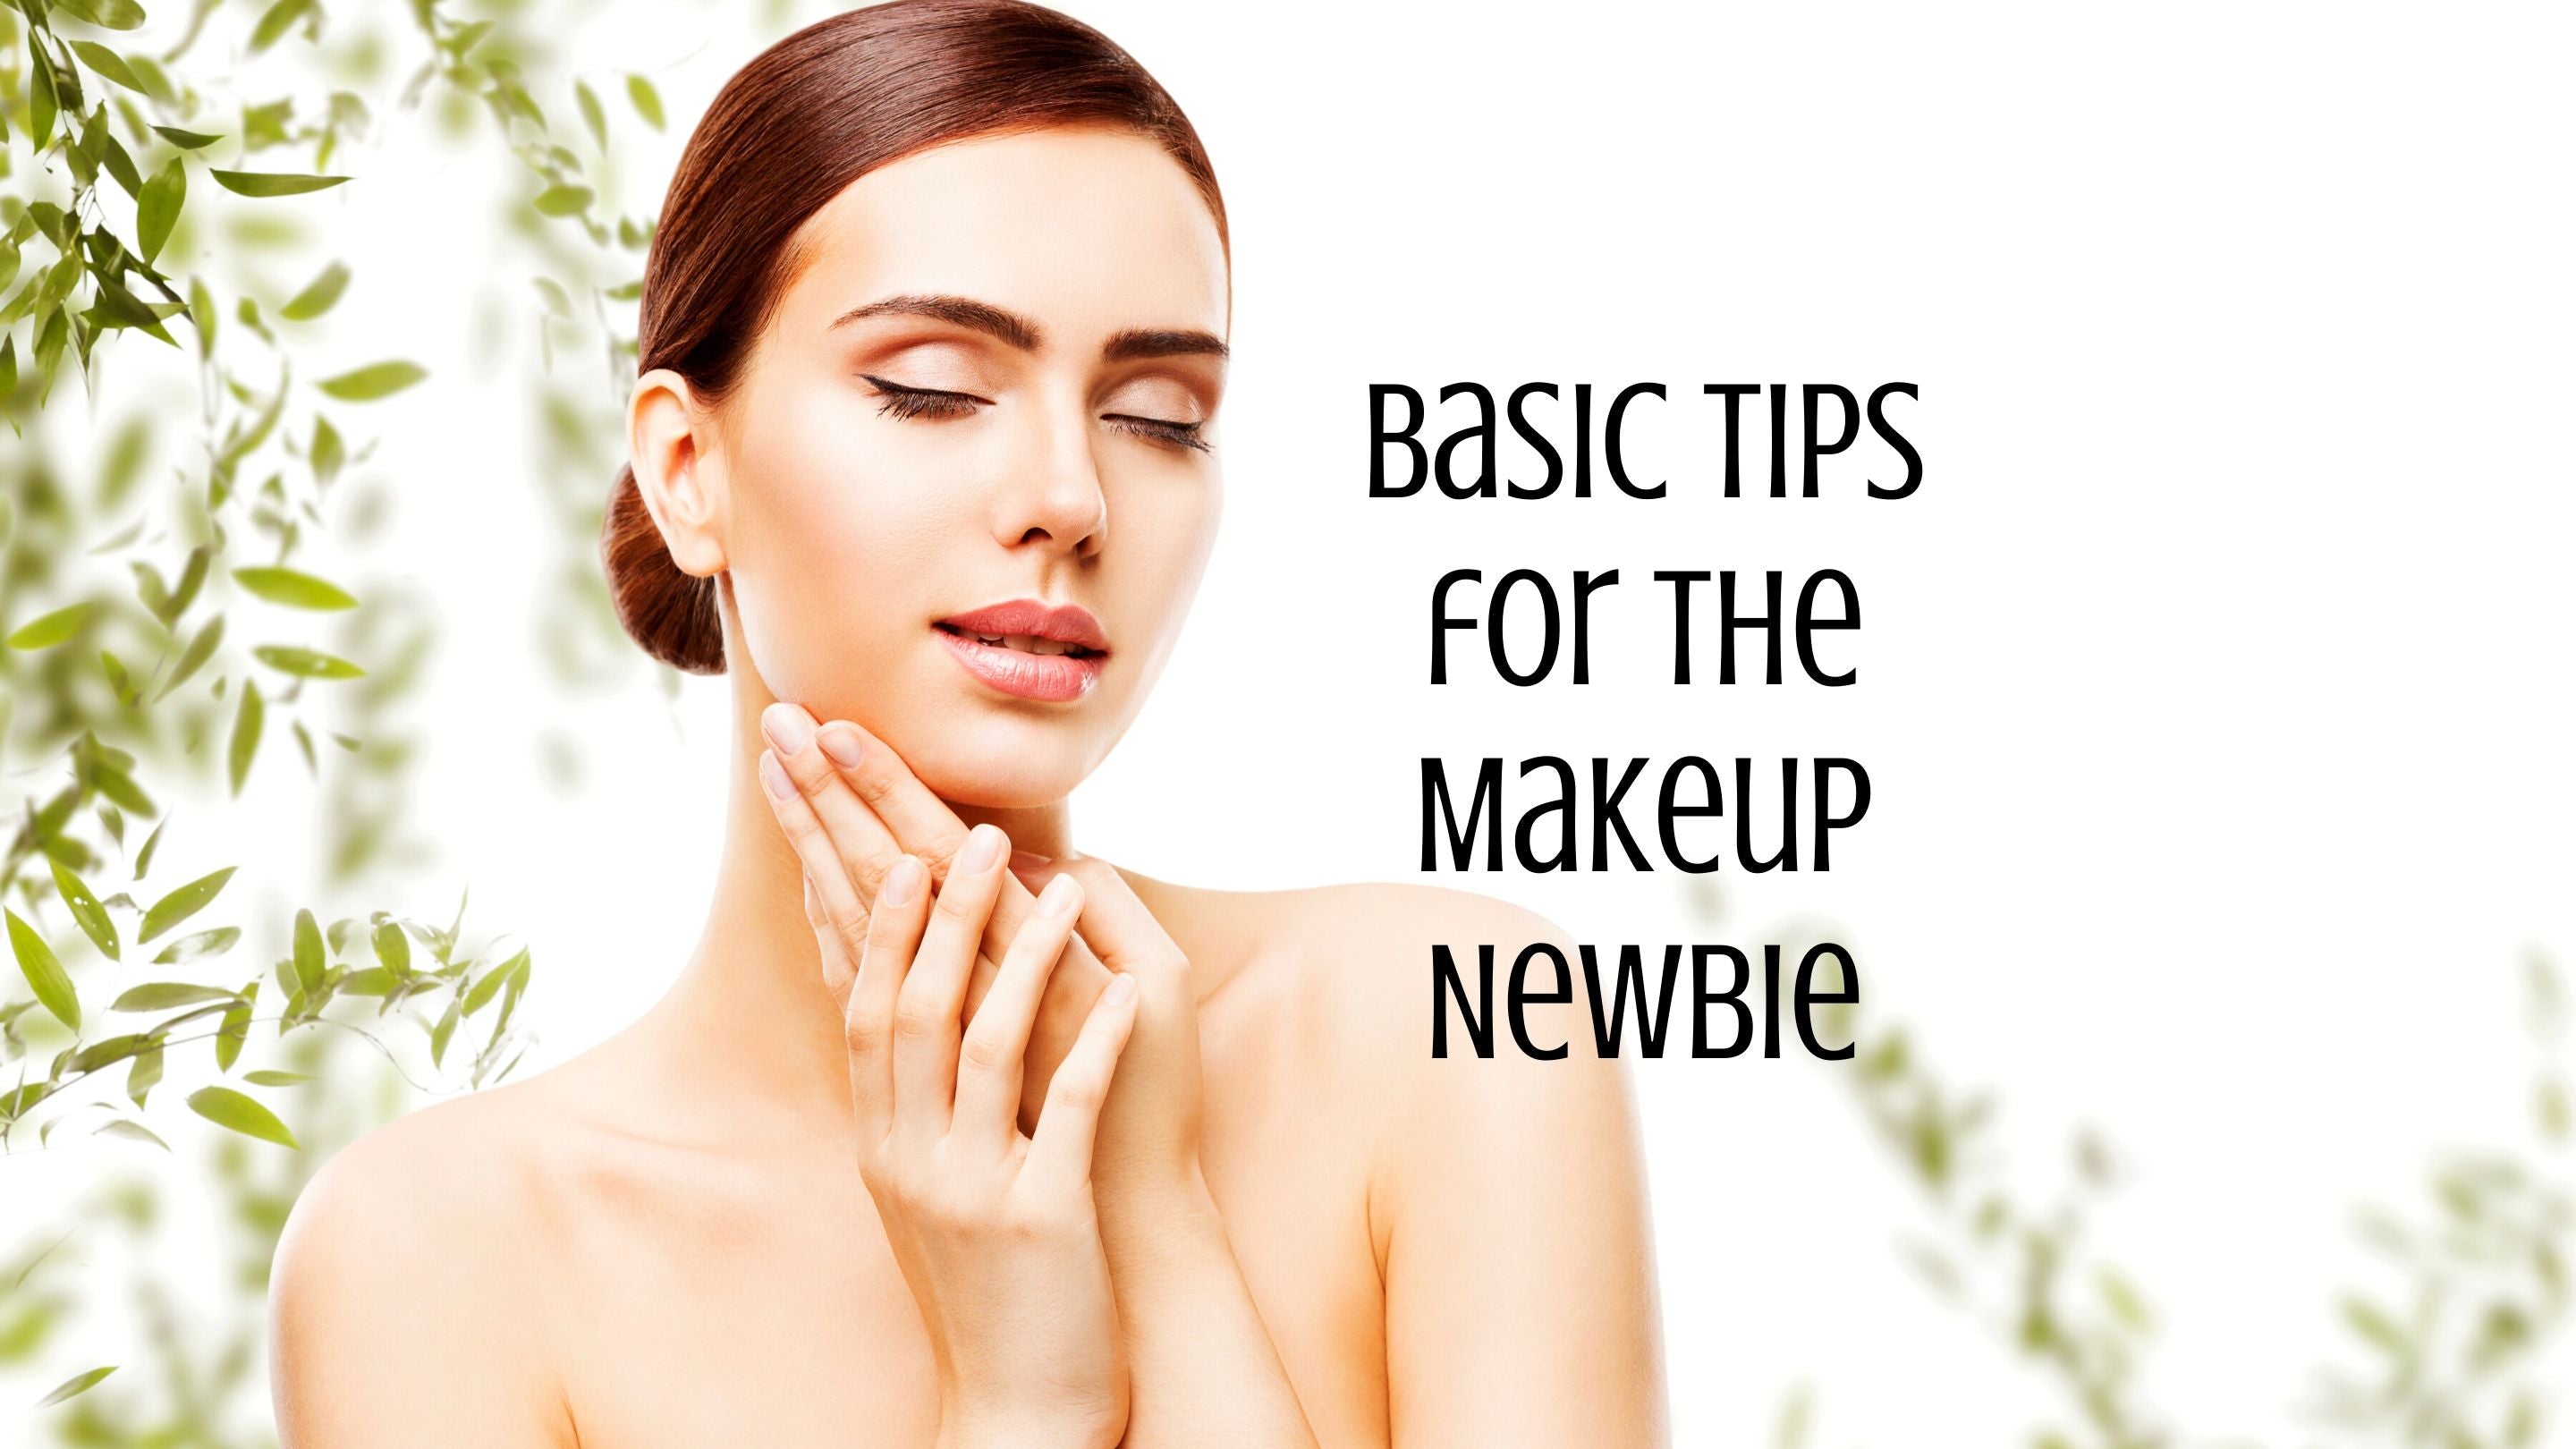 Am I Doing This Right? Basic Tips for the Makeup Newbie